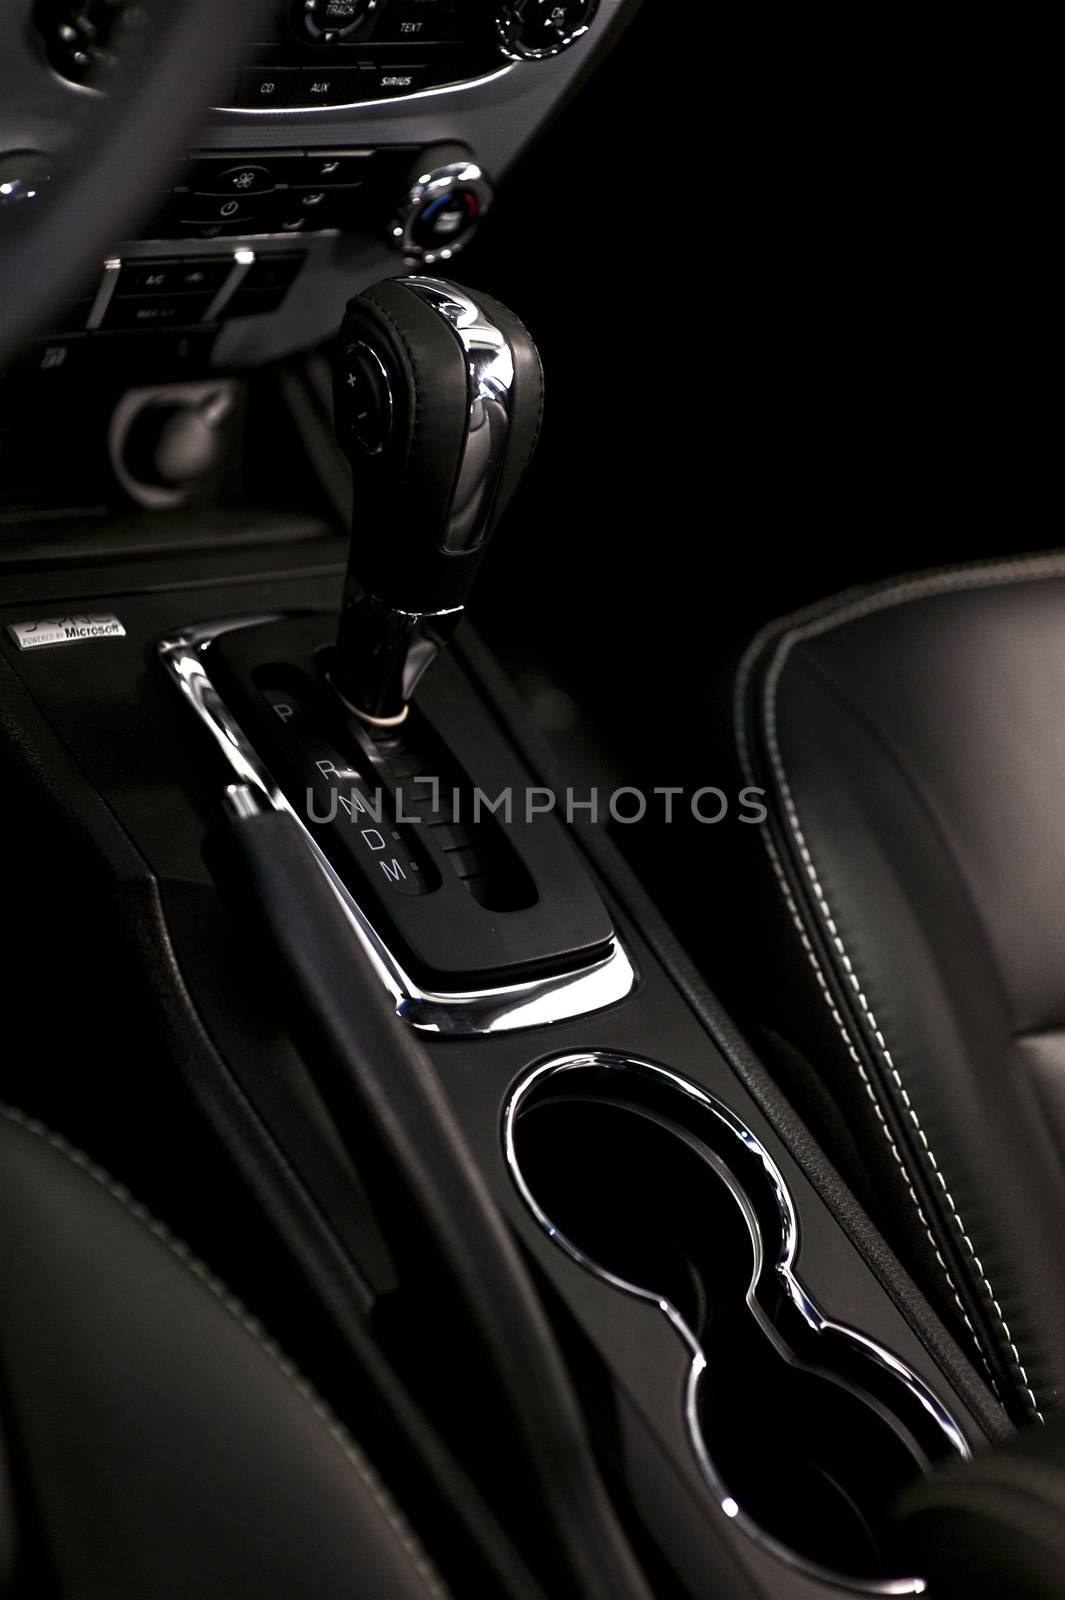 Modern Interior Car Design. Black Leather Vehicle Interior with Chrome Elements. Vertical Photo.